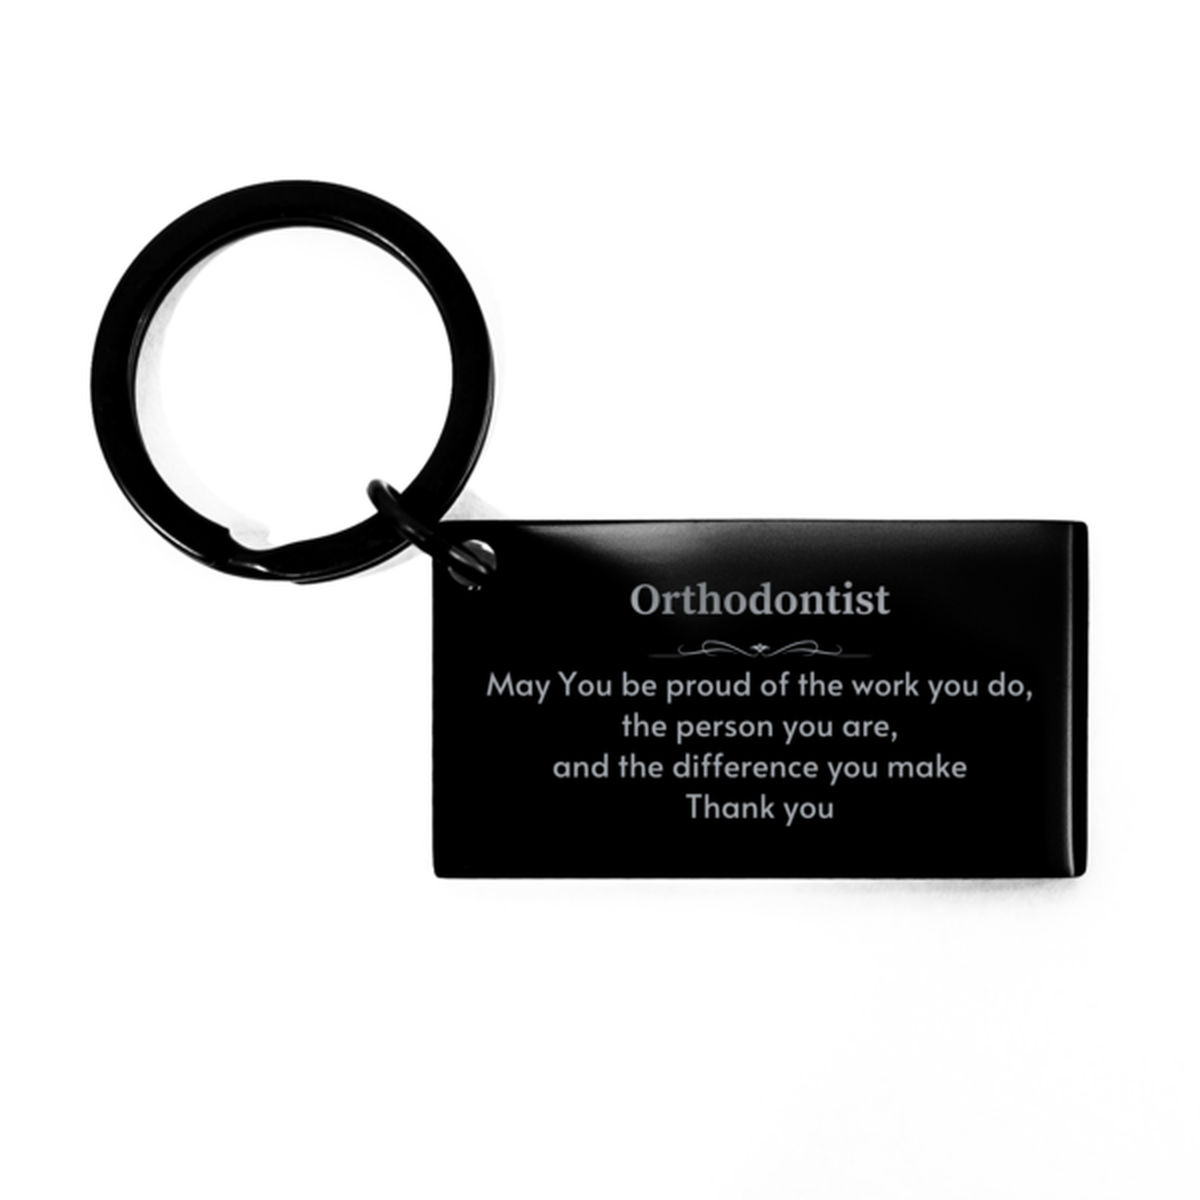 Heartwarming Keychain Retirement Coworkers Gifts for Orthodontist, Preacher May You be proud of the work you do, the person you are Gifts for Boss Men Women Friends